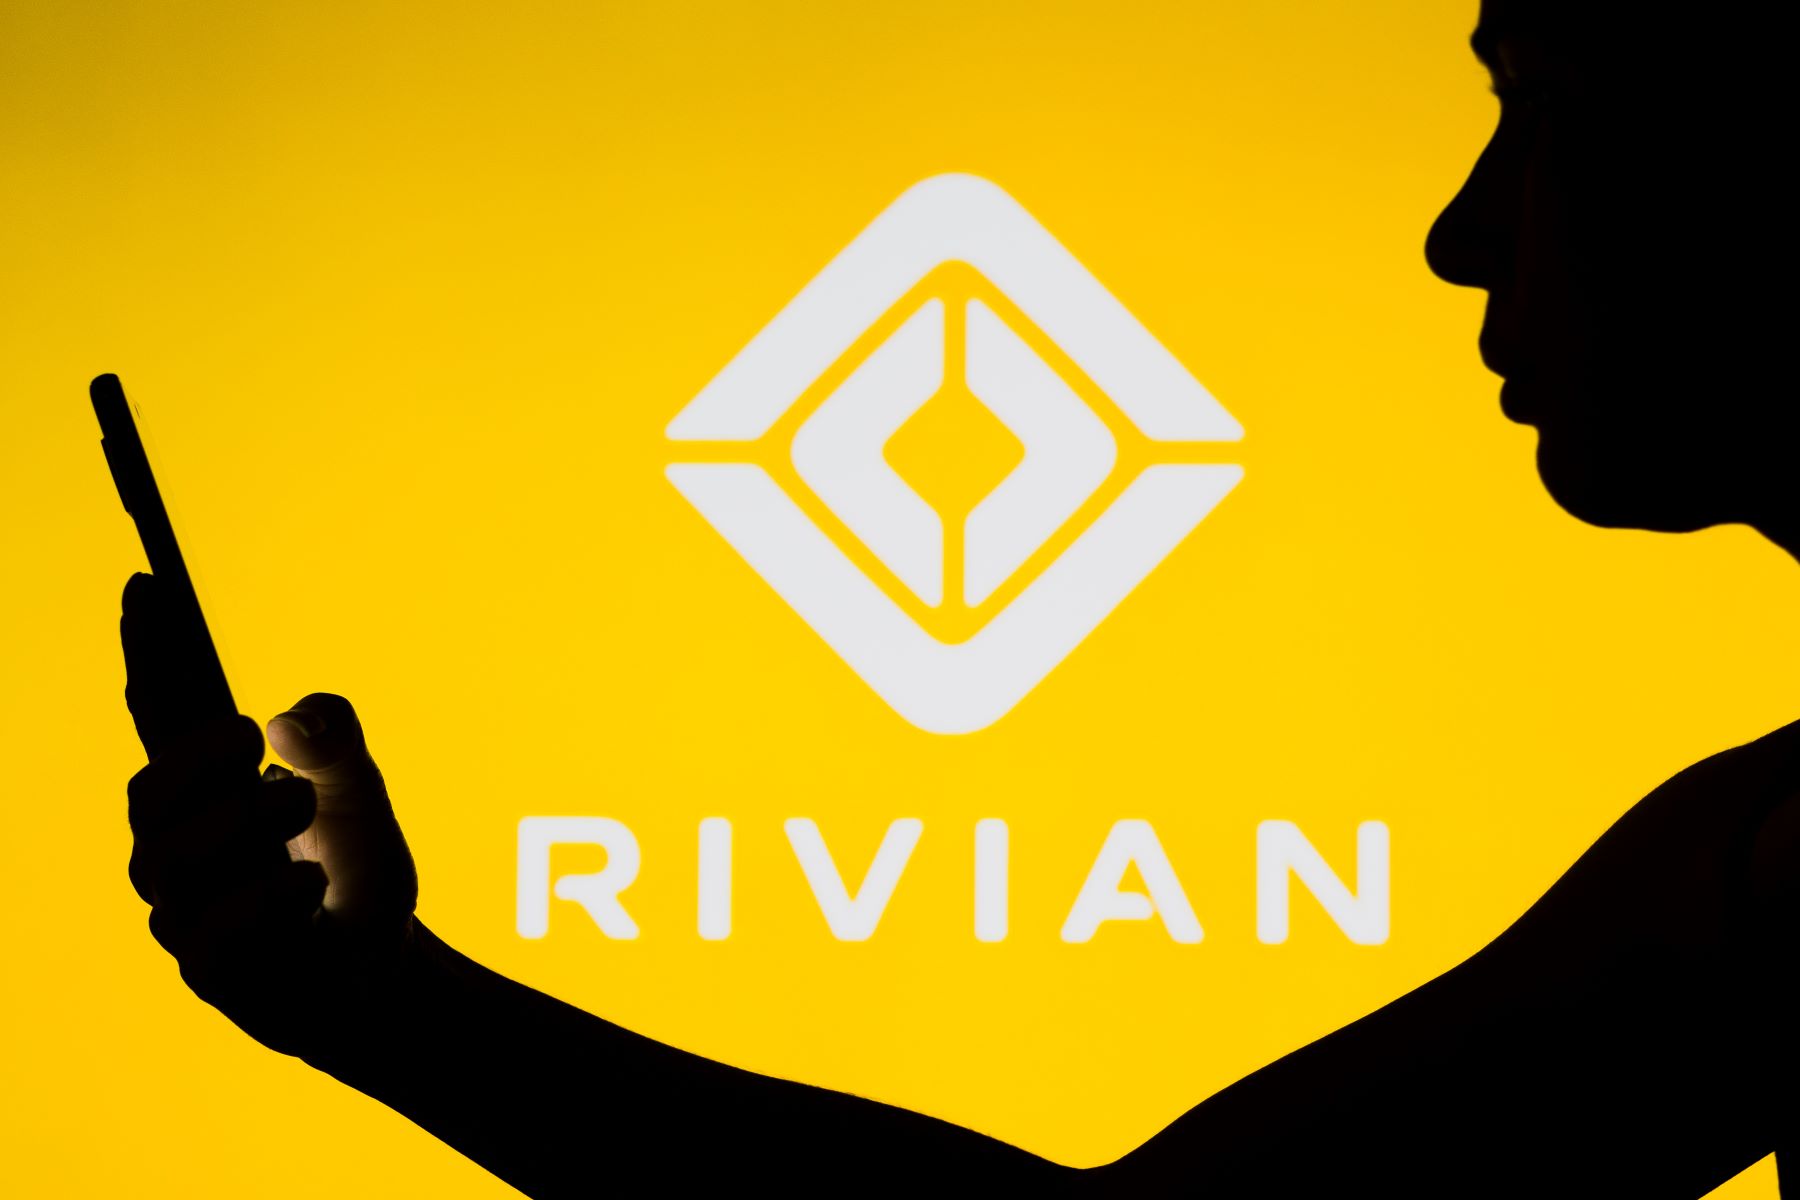 The Rivian EV company logo with a silhouette of someone on a smartphone in the foreground